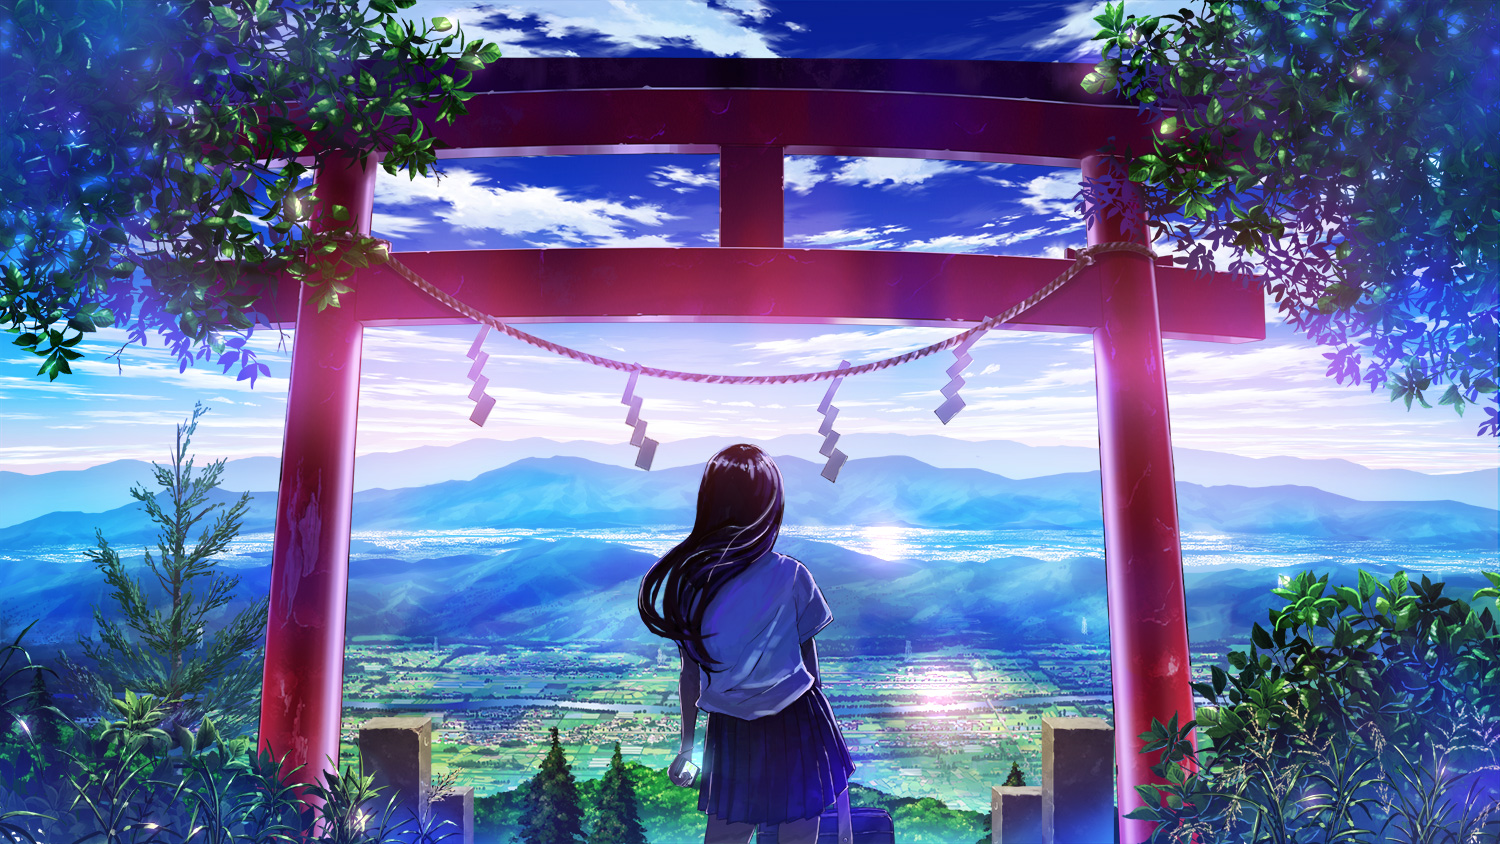 Anime 1500x844 shrine landscape high view summer plants trees mountains sky clouds anime from behind